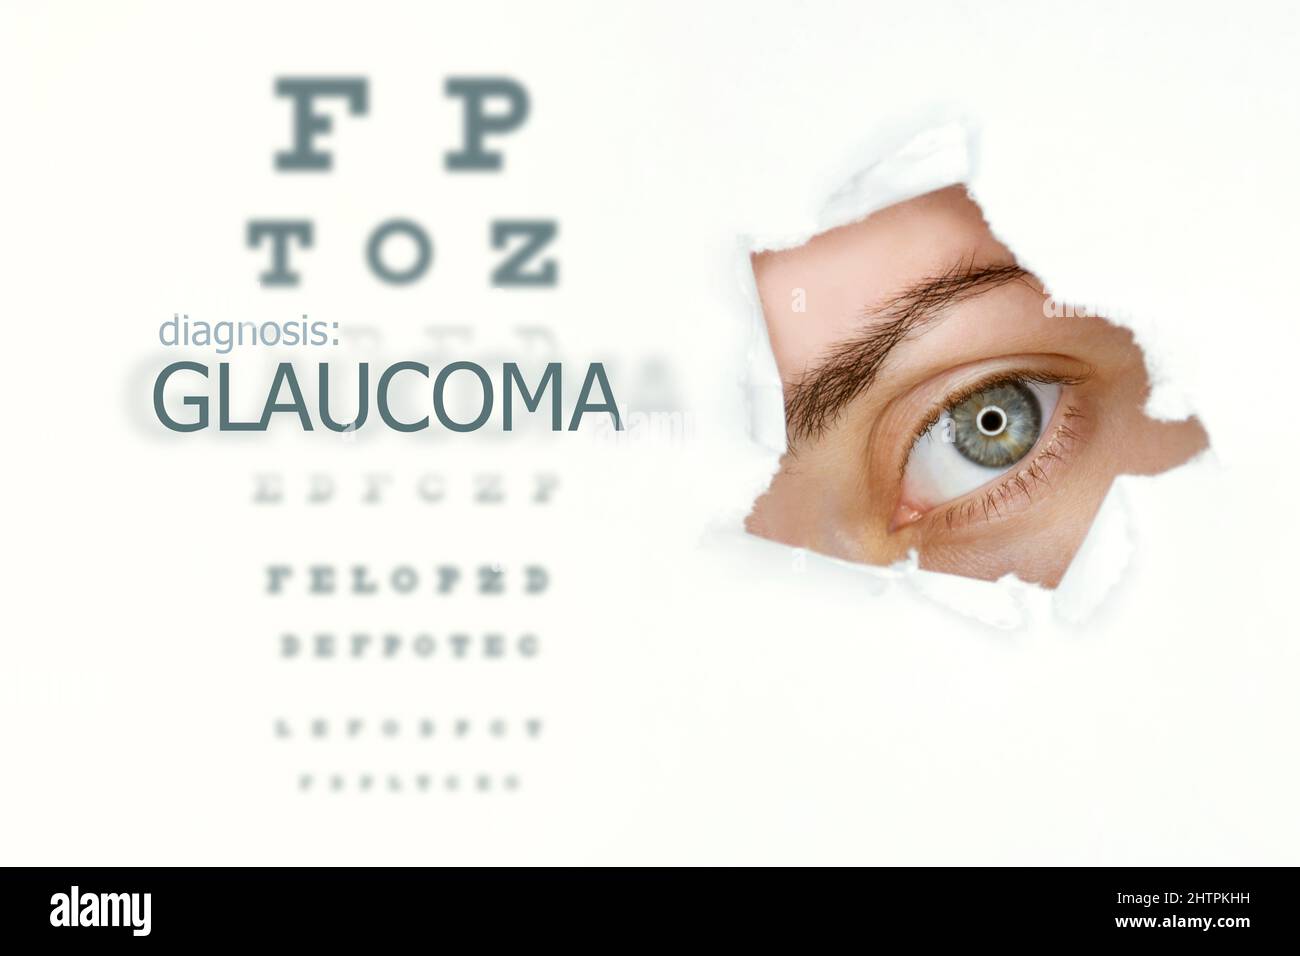 Glaucoma disease poster with eye test and blue eye on right Stock Photo